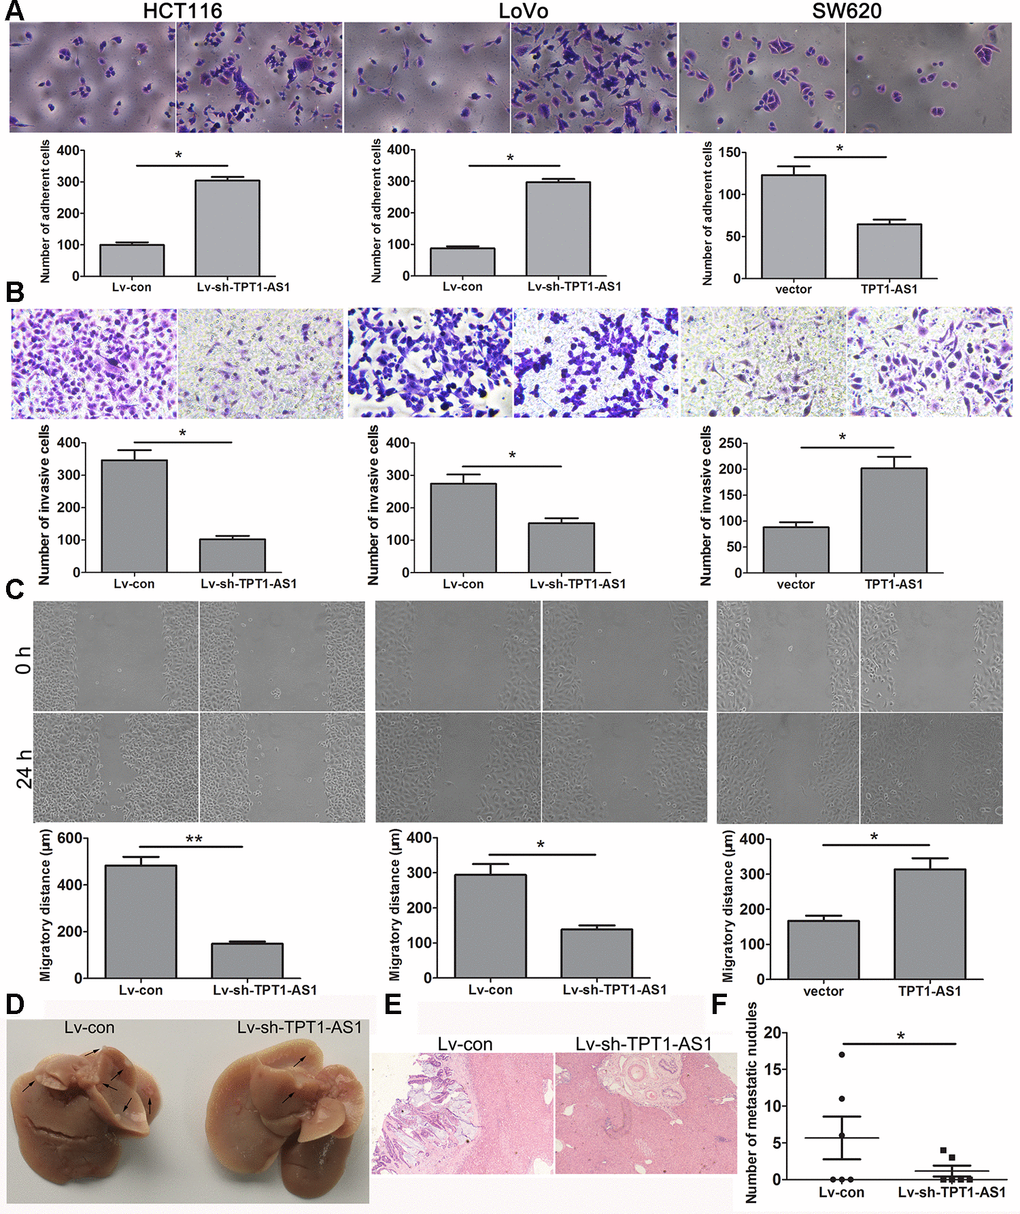 TPT1-AS1 promotes CRC cell migration and invasion in vitro and vivo. (A) Cell adhesion assay was applied to determine the effect of TPT1-AS1 on CRC cell adhesion (magnification 200x). Wound scratch (magnification 100x) (B) and Transwell assays (magnification 200x) (C) were performed to examine the effect of TPT1-AS1 on CRC cell invasion and migration. (D) TPT1-AS1 knockdown suppressed CRC liver metastasis in vivo, the gross specimen images of liver metastases. (E) The metastatic nodules in liver tissue were detected by HE staining (magnification 100x). (F) The statistical analysis of number of liver metastatic nodules. *PP 